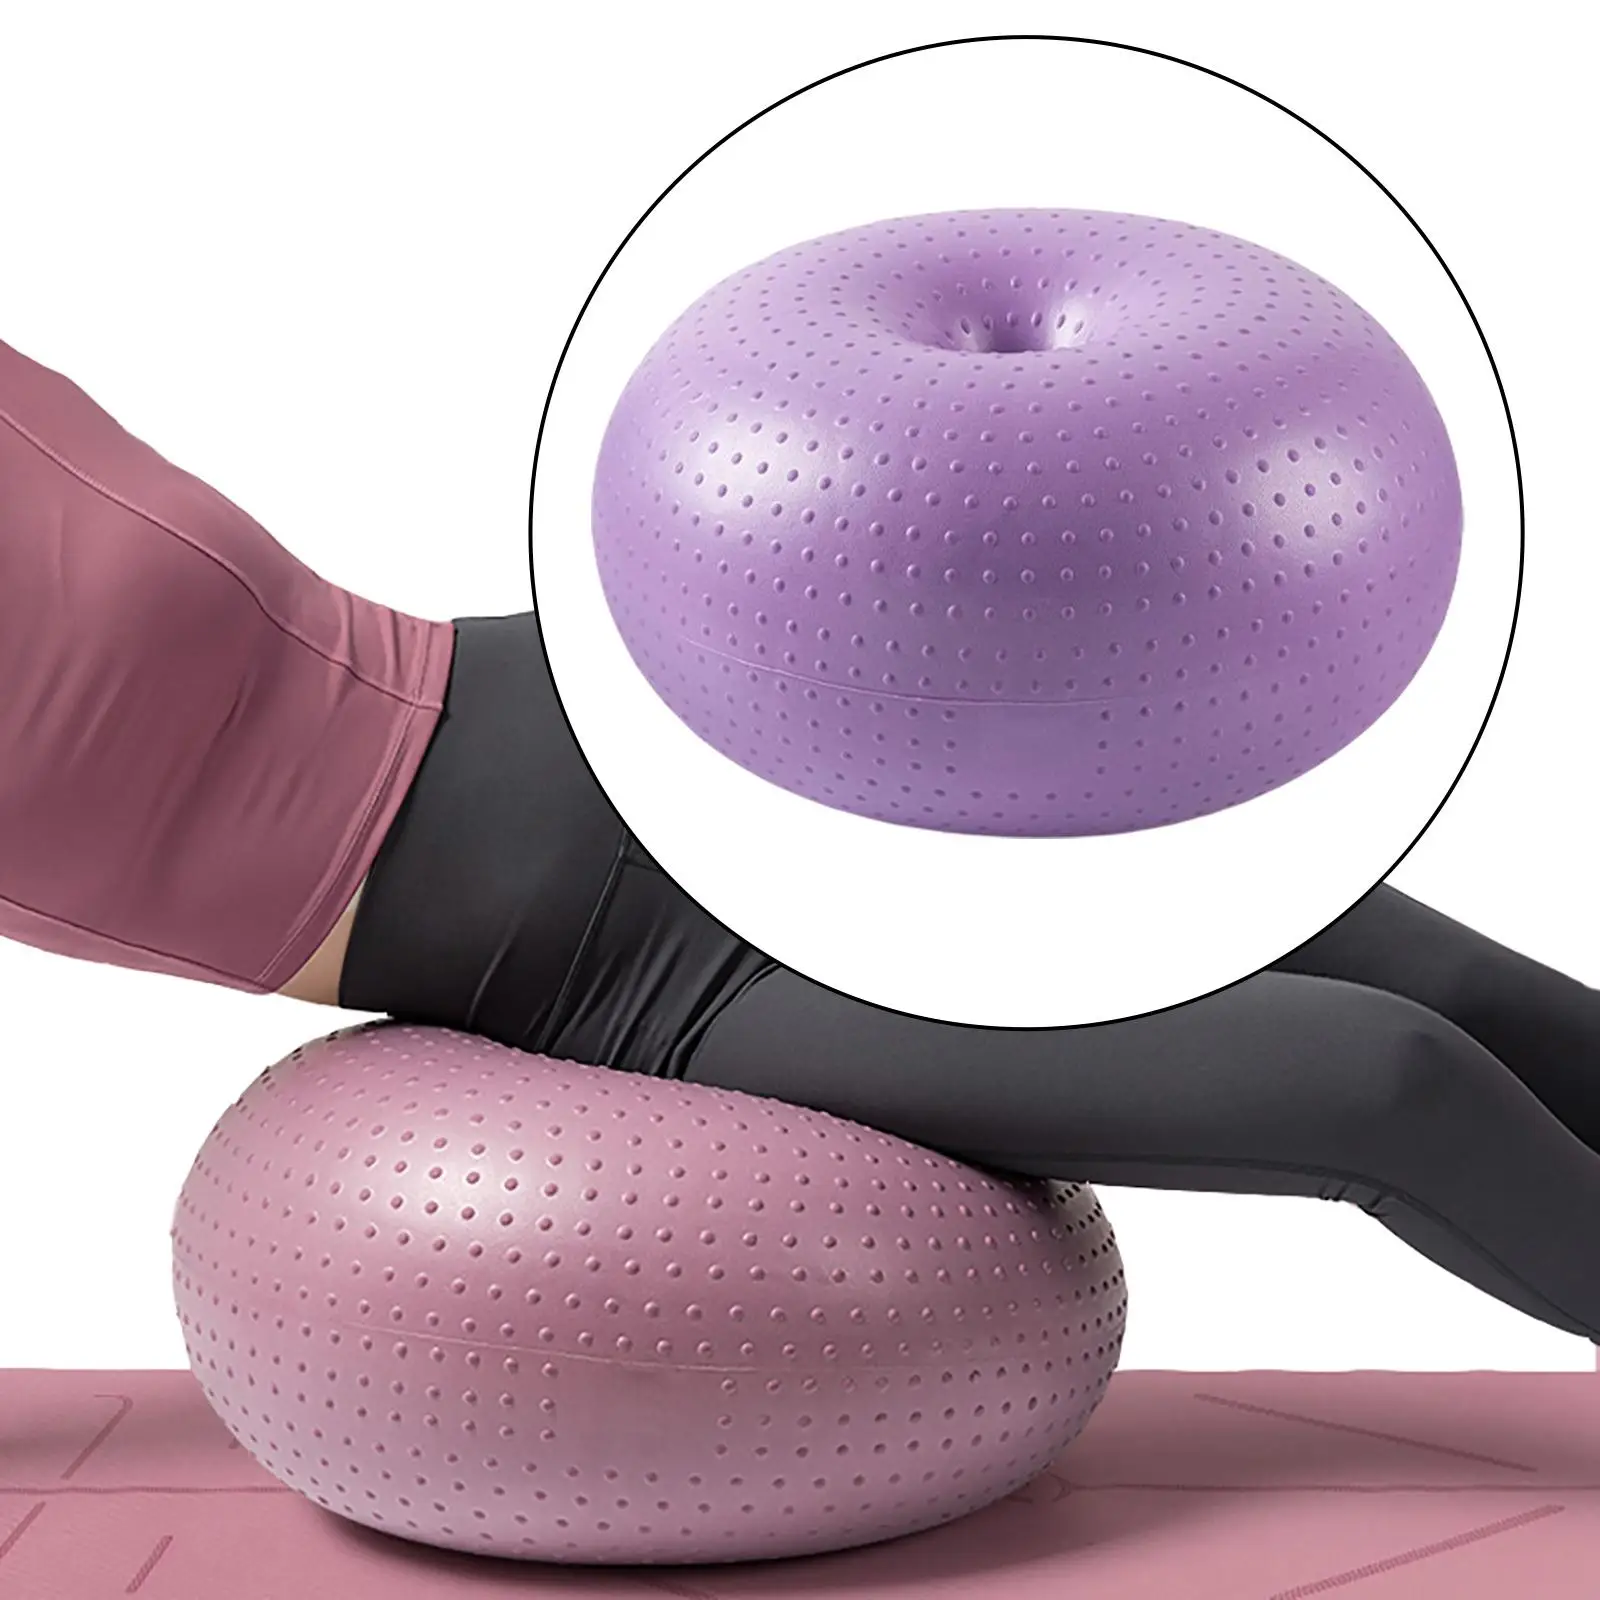 1x Pilates Donut Balance Inflatable Stability Strength Exercise Aid Thickening Fitness Ball Yoga Ball for Office Classroom Home